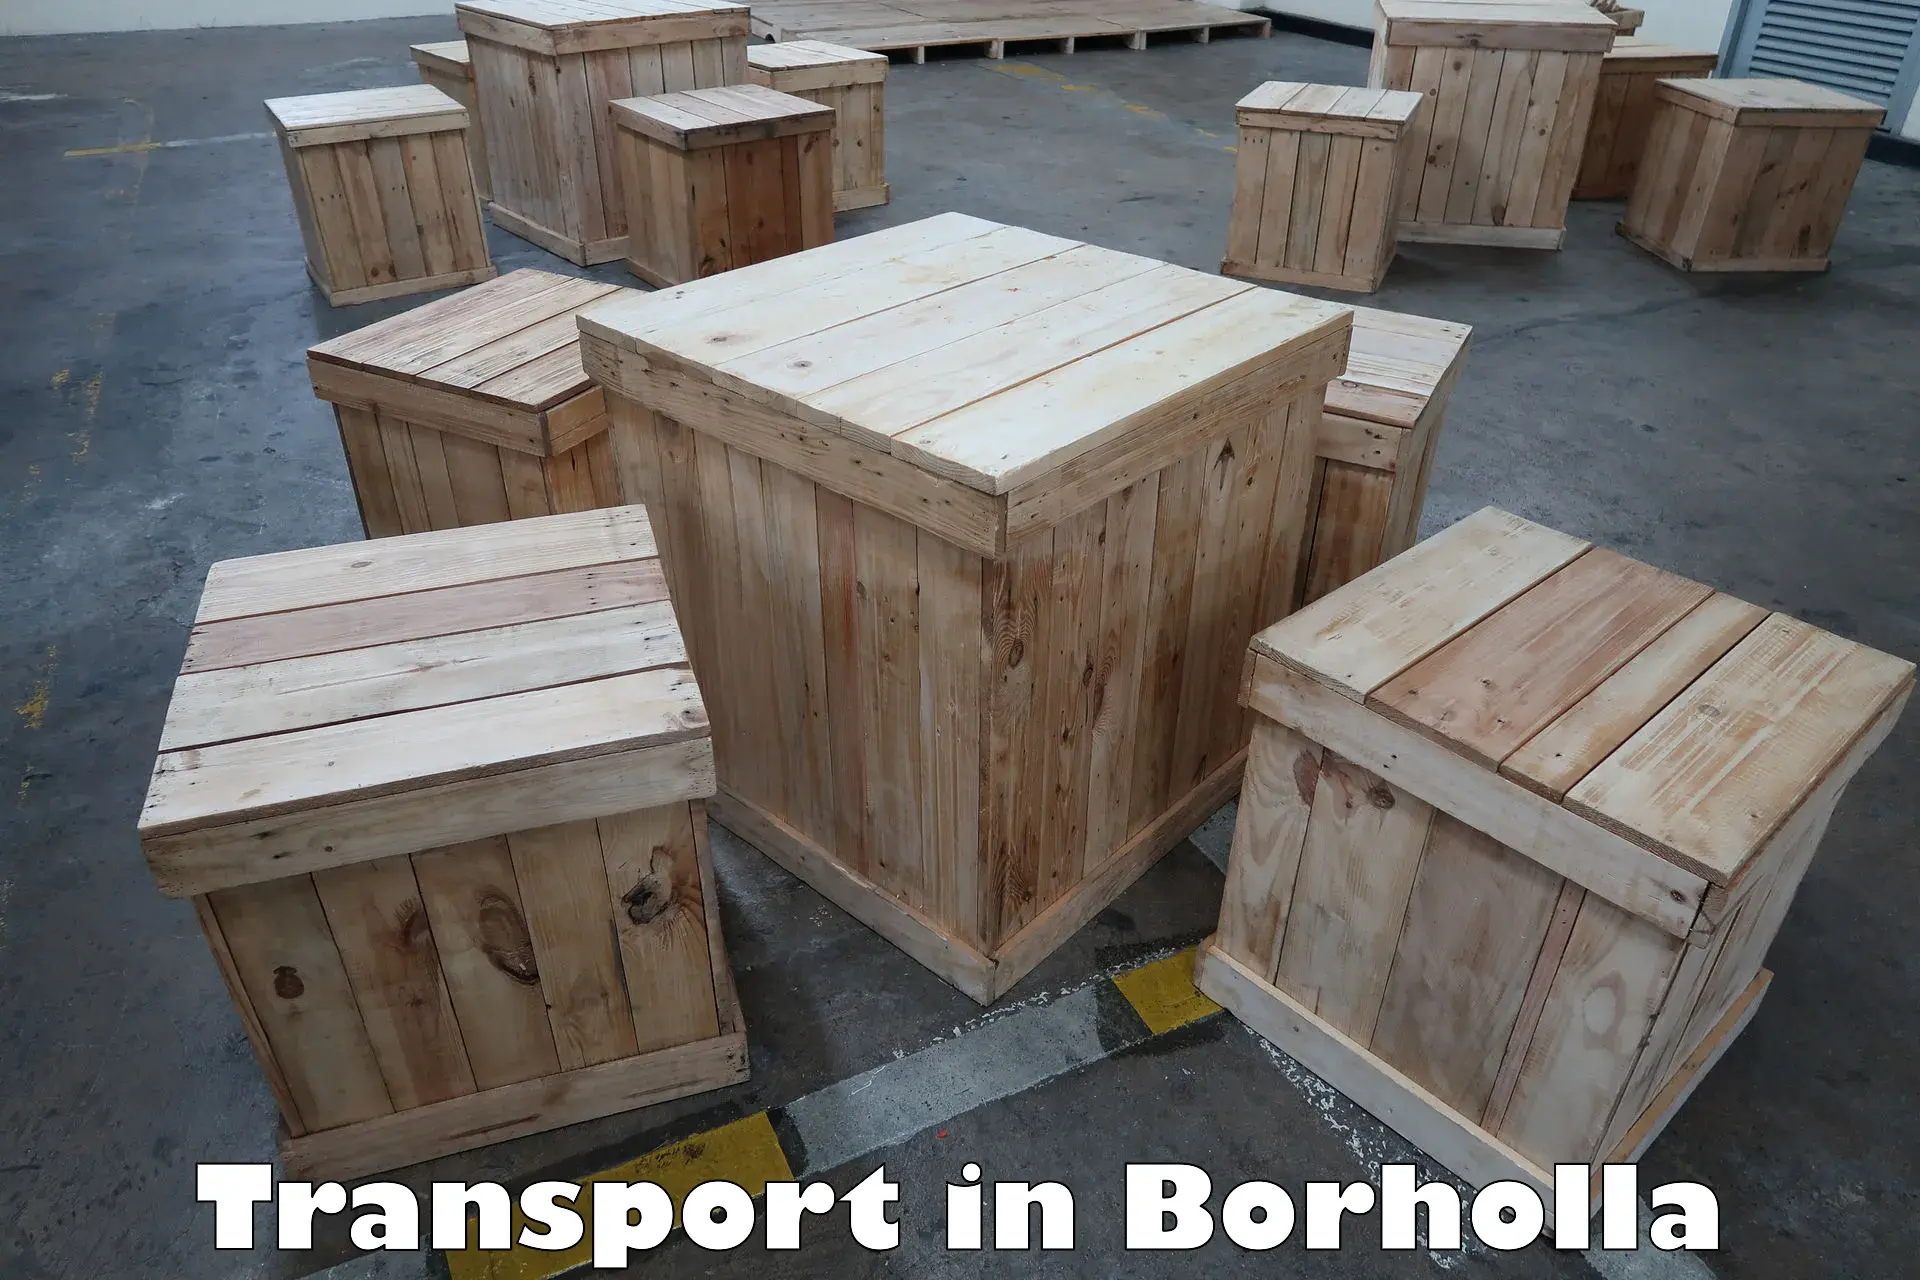 Transport shared services in Borholla